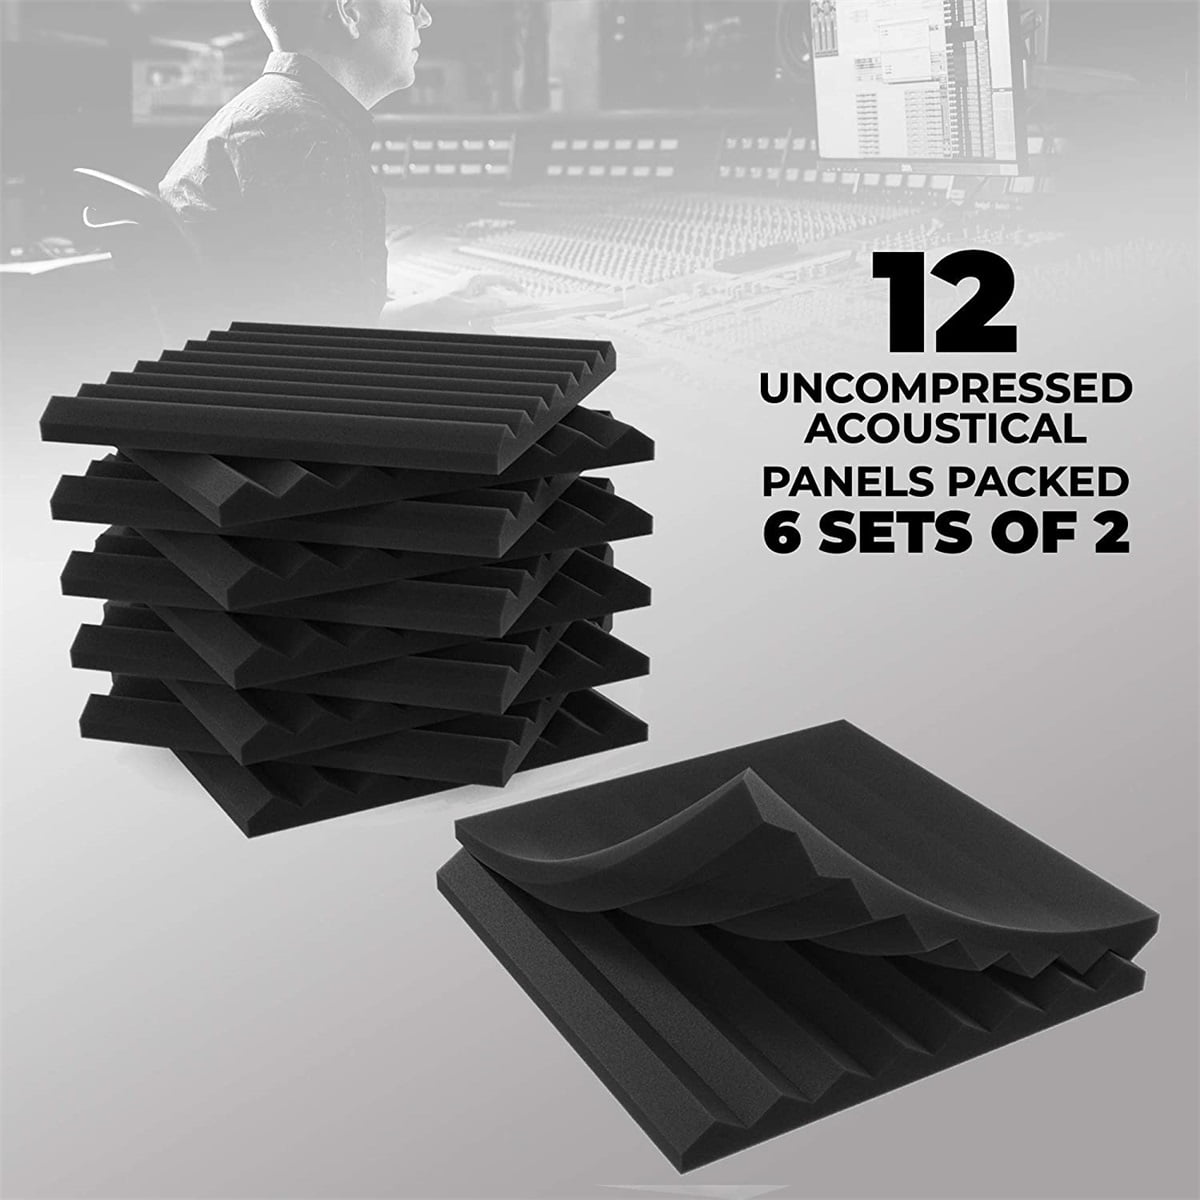 Door High Density Sound Proofing Padding for Wall Ceiling 36 Pack Sound Proof Foam Panels Acoustic Foam 1 X 12 X 12 Fireproof Studio Foam Wedges Soundproof Foam Home & Studio Sound Insulation 